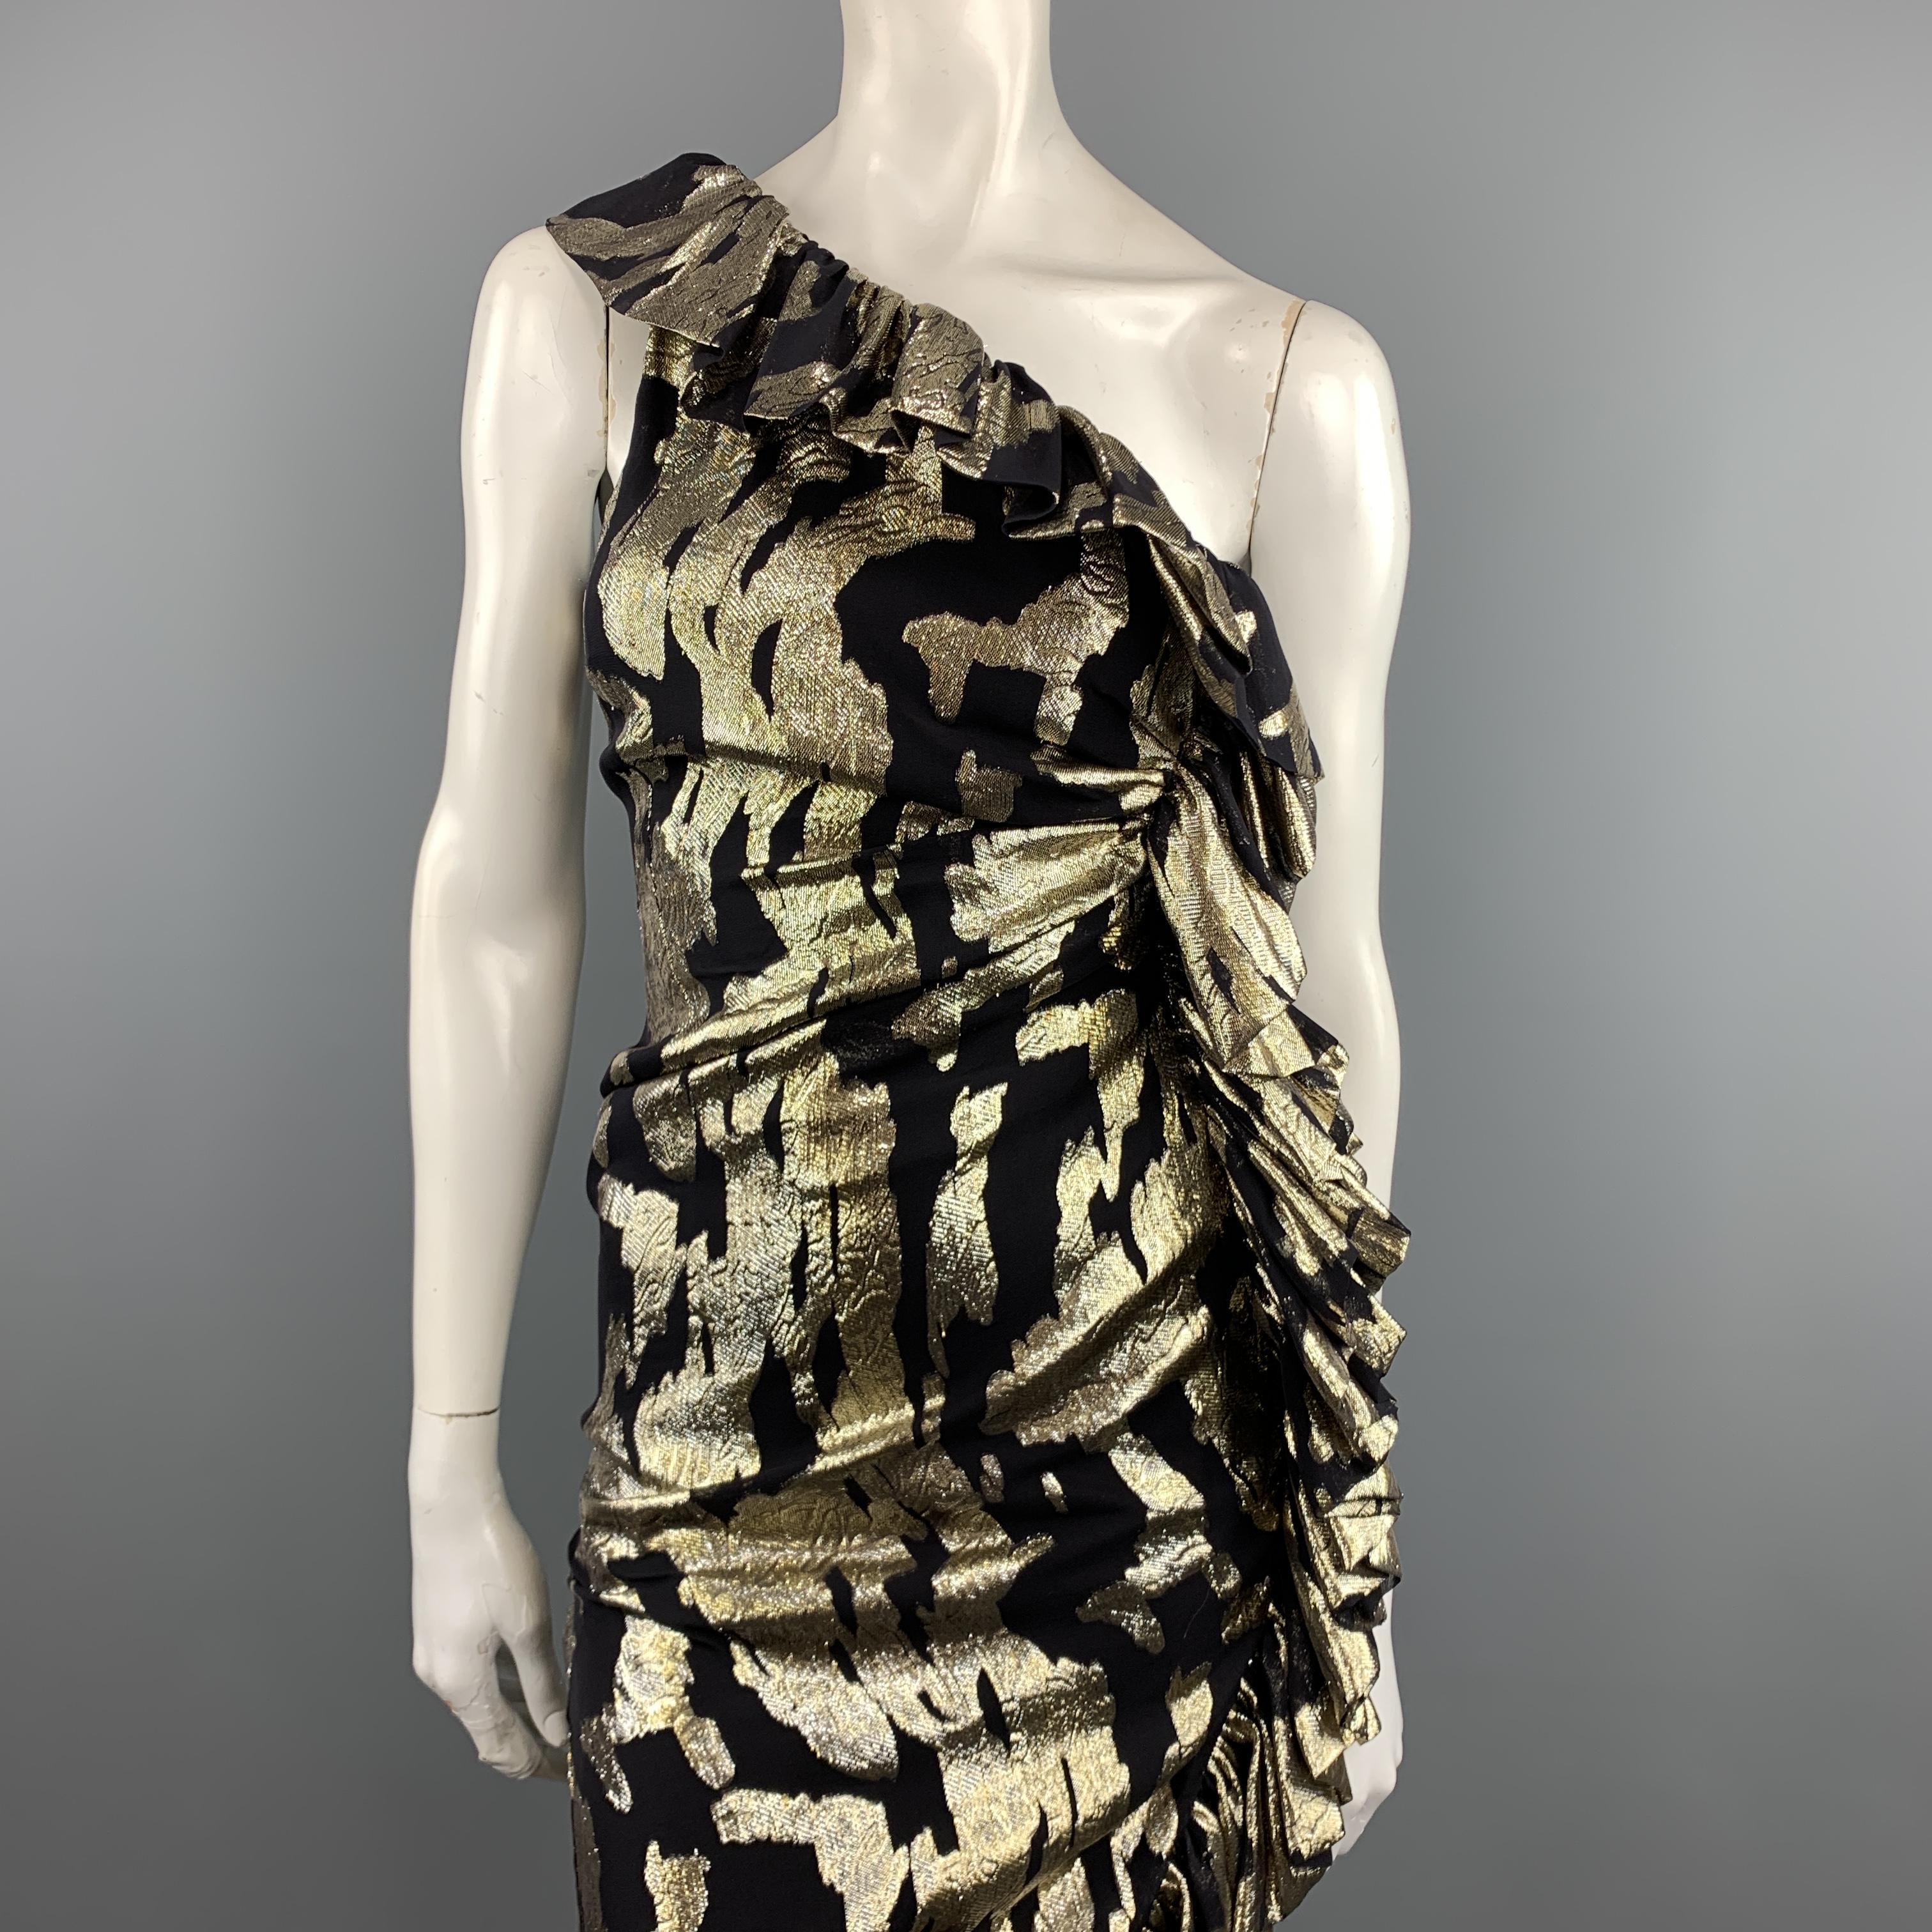 ATTICO cocktail dress comes in black silk chiffon with metallic gold foil print throughout and features a one shoulder neckline, asymmetrical rushed hem line, and ruffled trim. Made in Italy.

New with Tags. Retails: $1,420.00.
Marked: IT